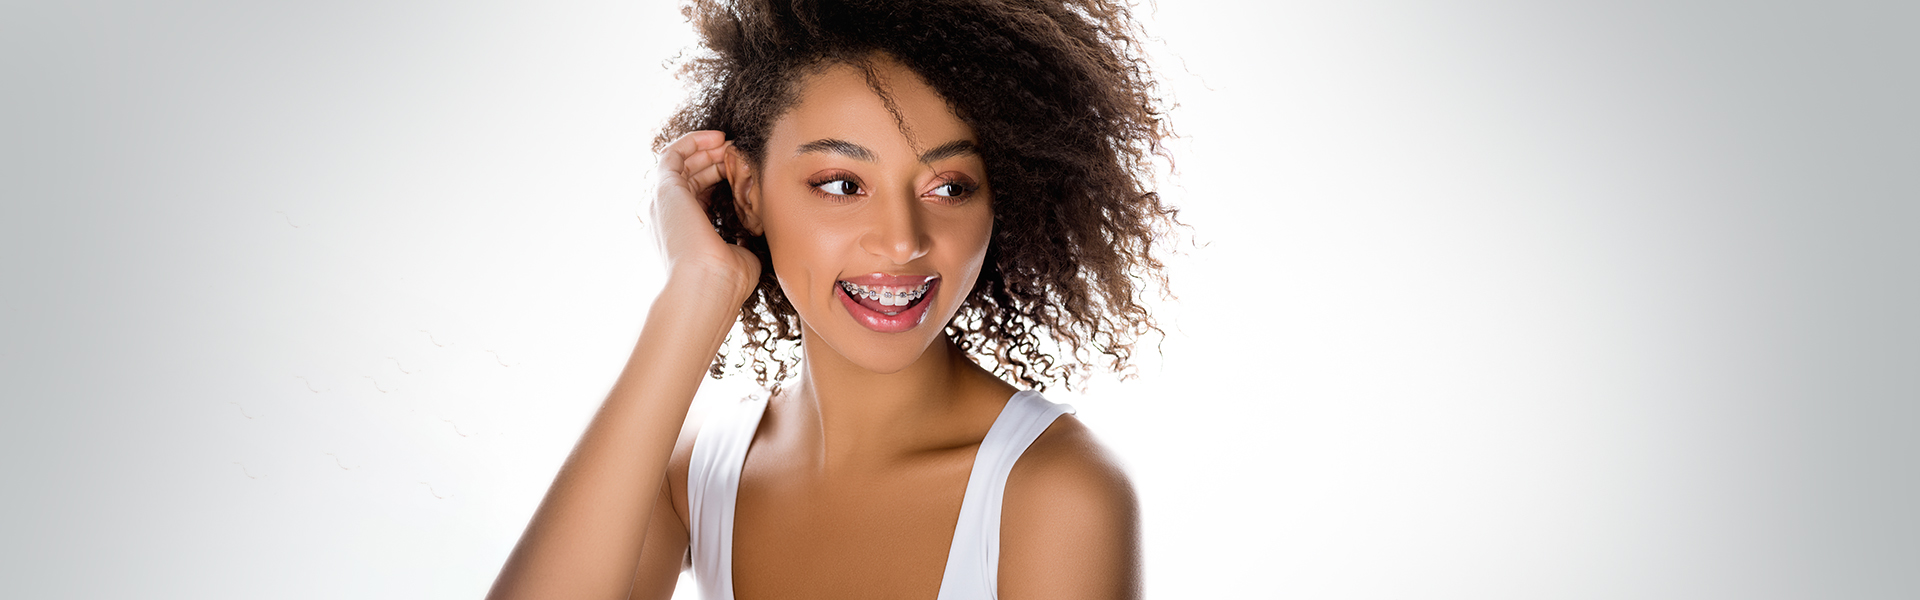 Orthodontic Treatments Can Effectively Revive Your Smile: Learn How Here